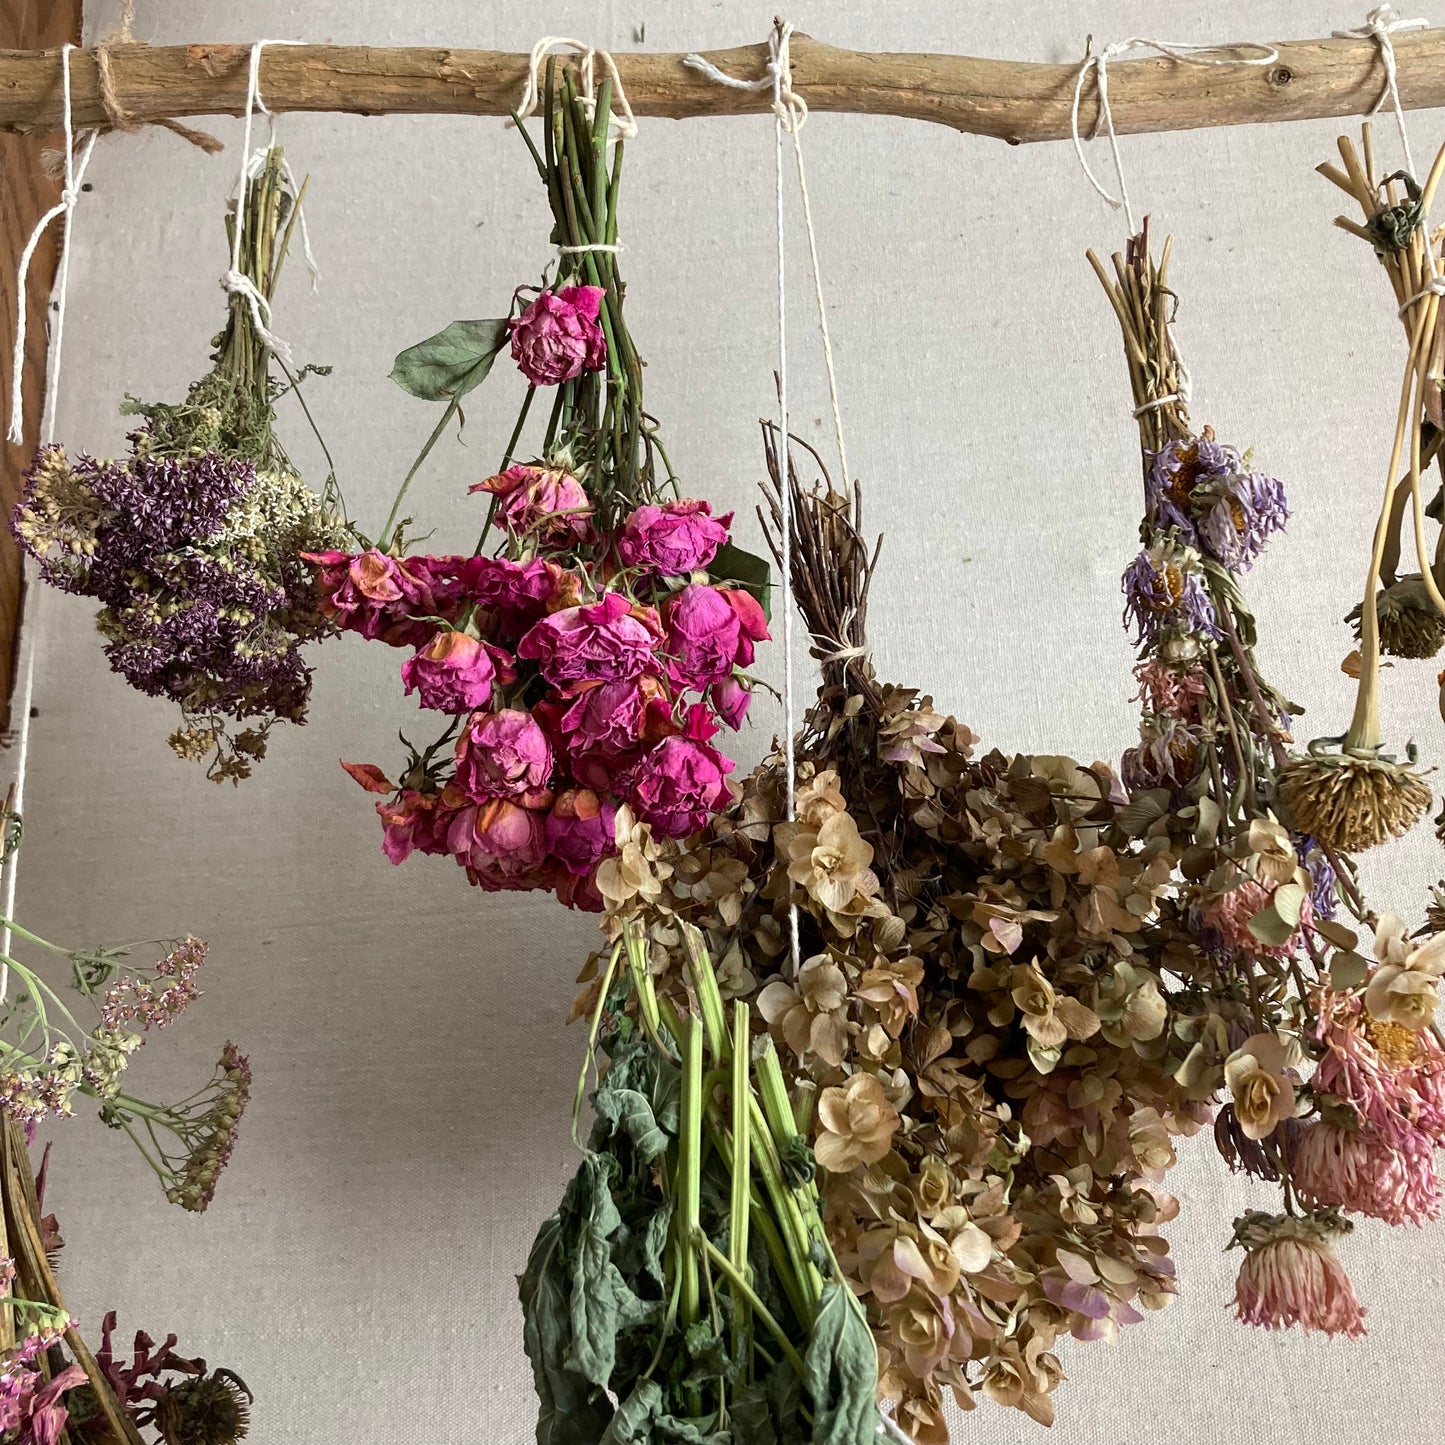 The Art of Drying Flowers | June 27th